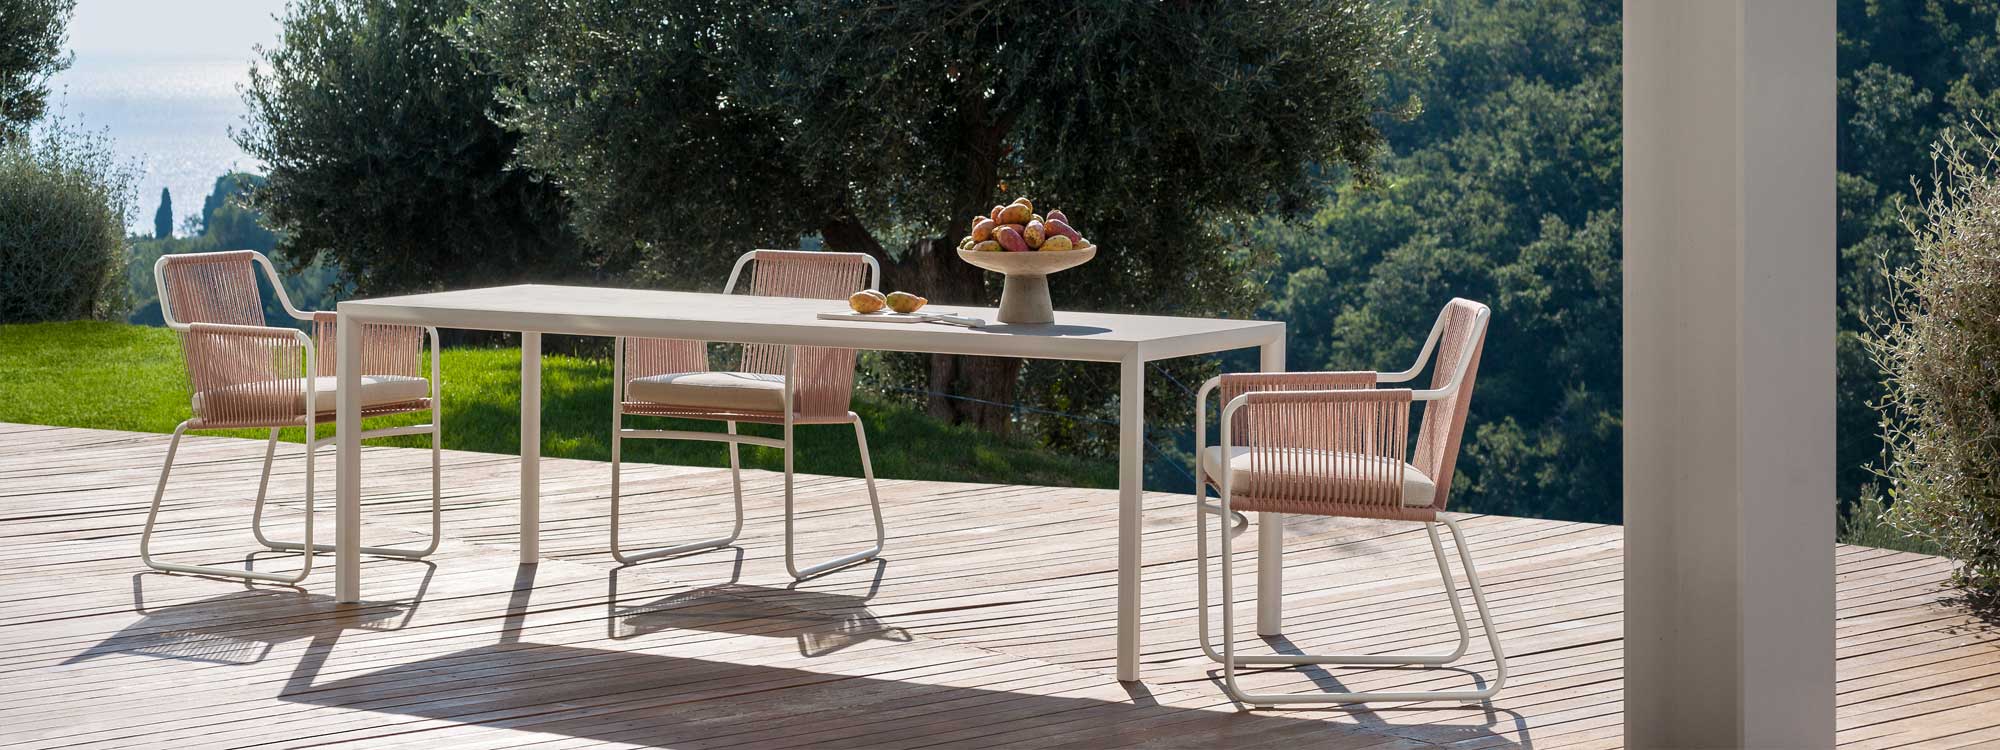 Harp exterior carver chairs & Plein Air minimalist dining table on wooden decking